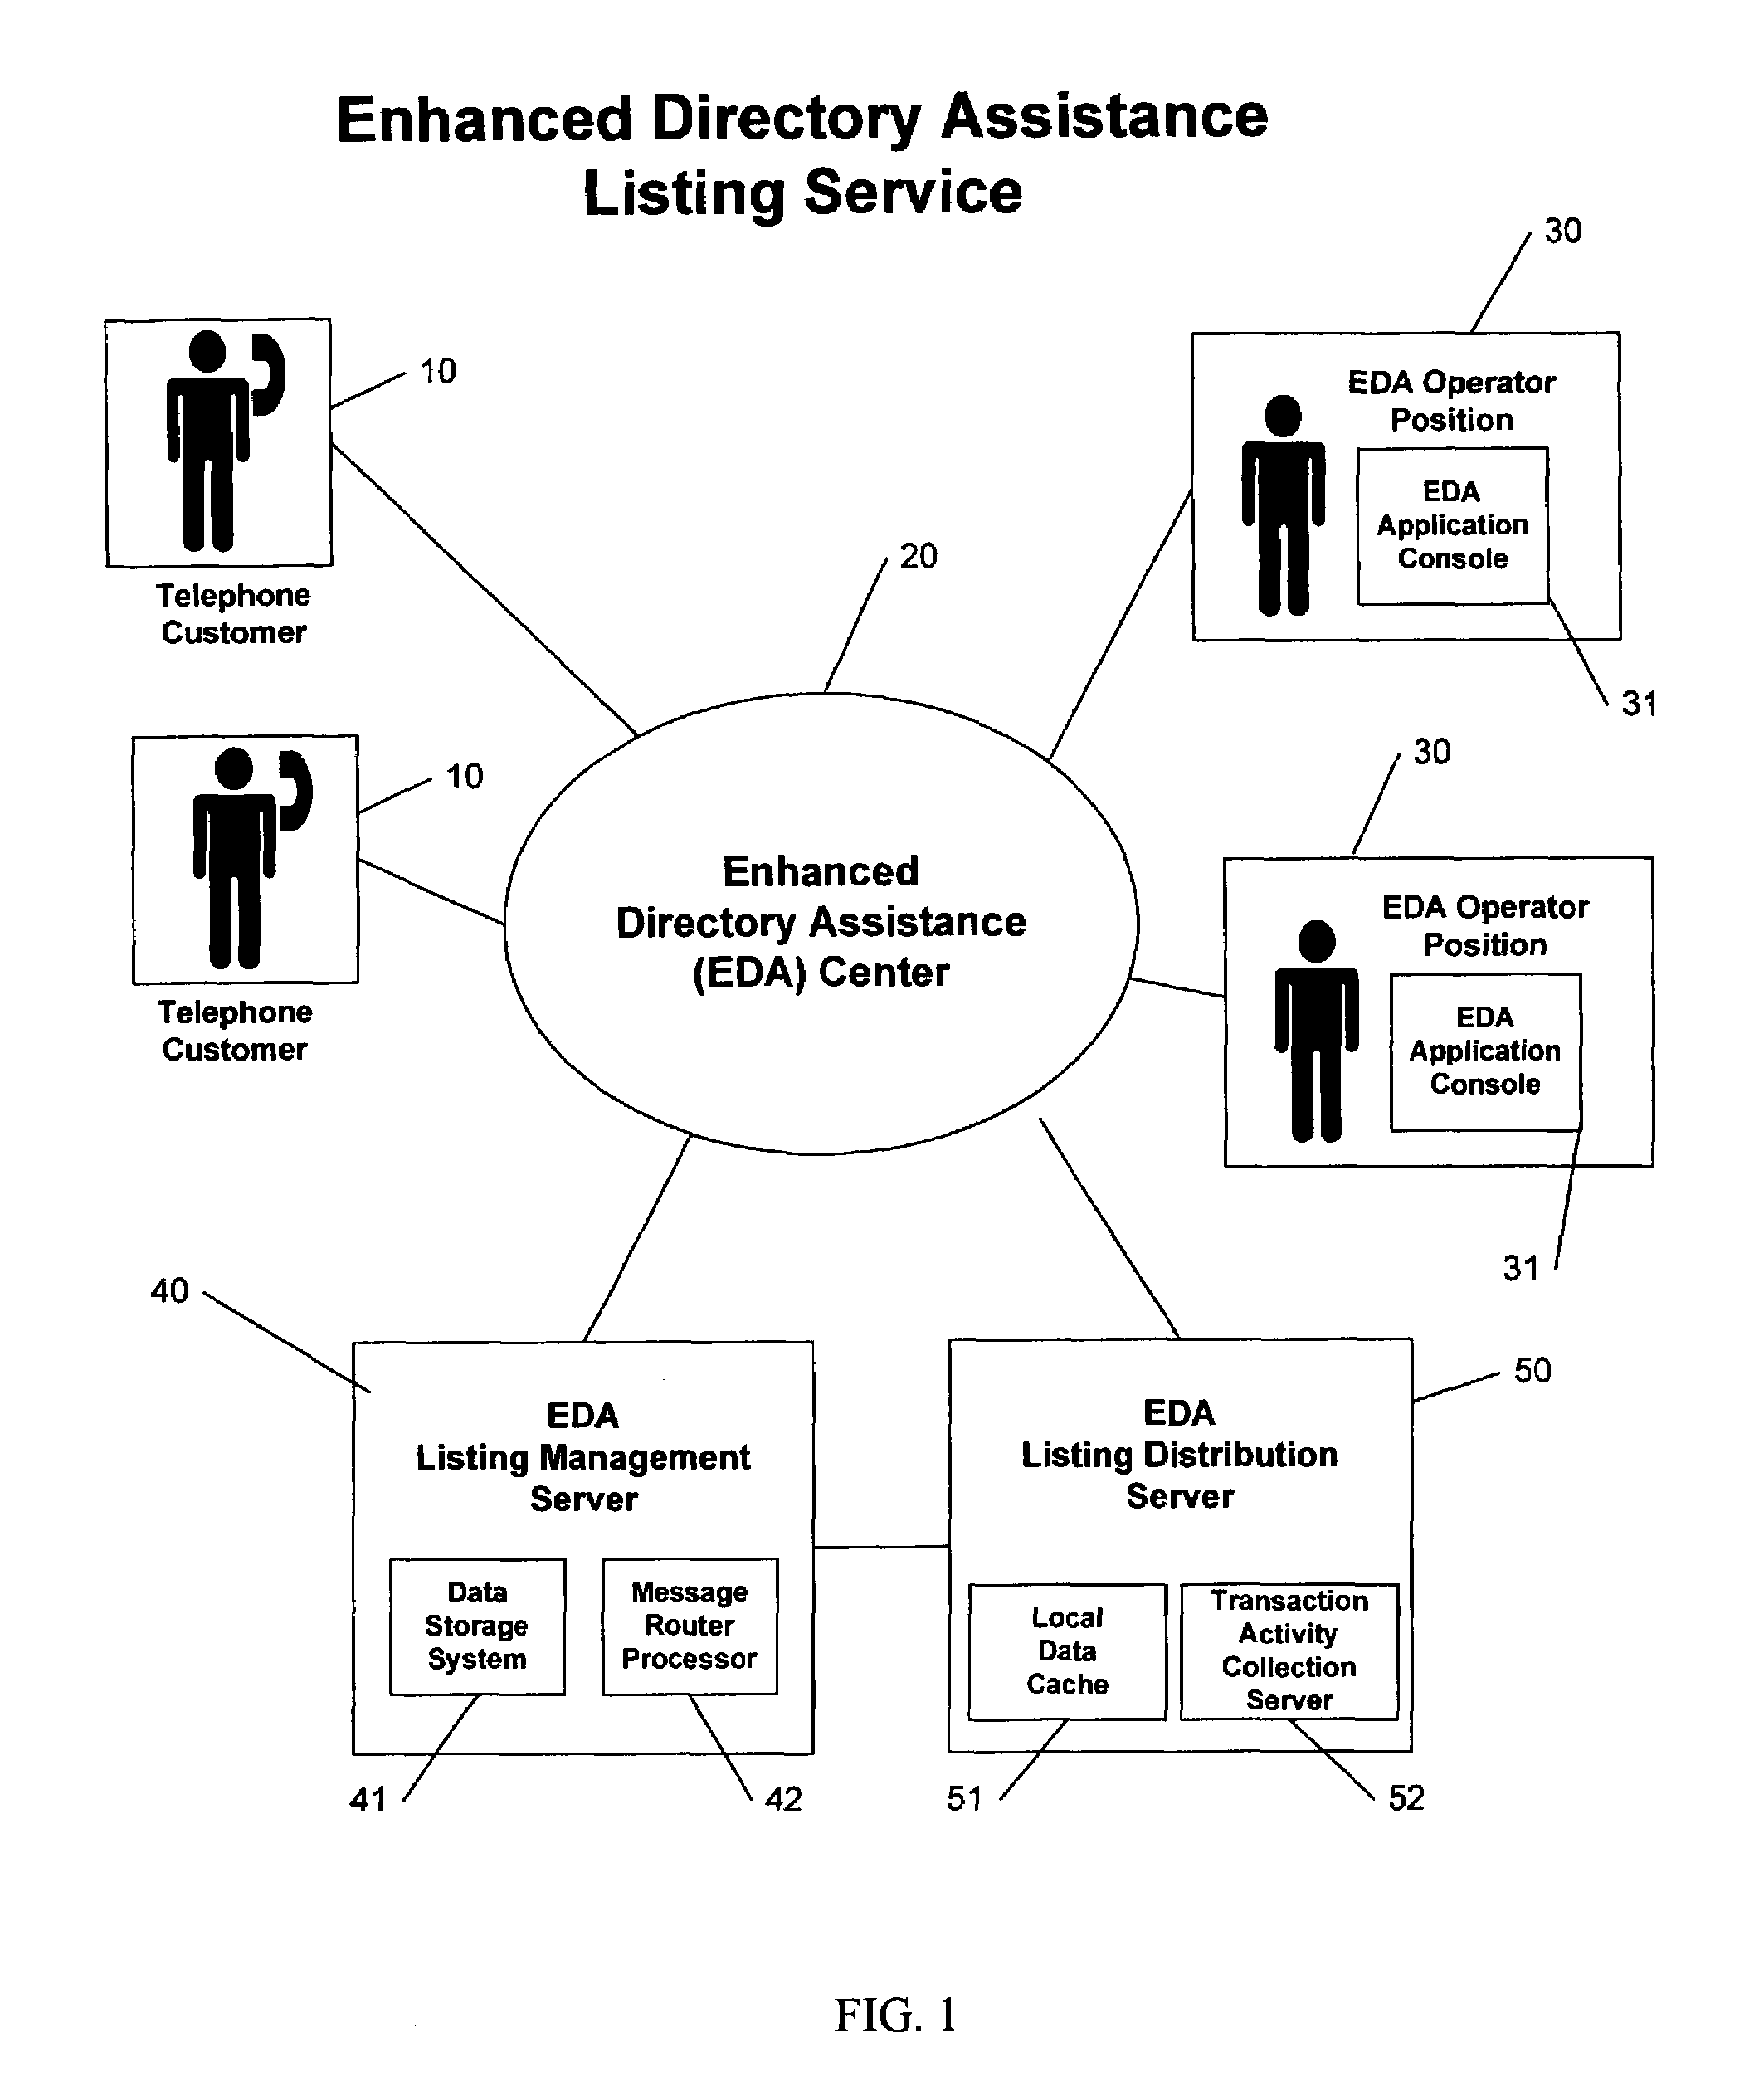 Enhanced directory assistance services in a telecommunications network